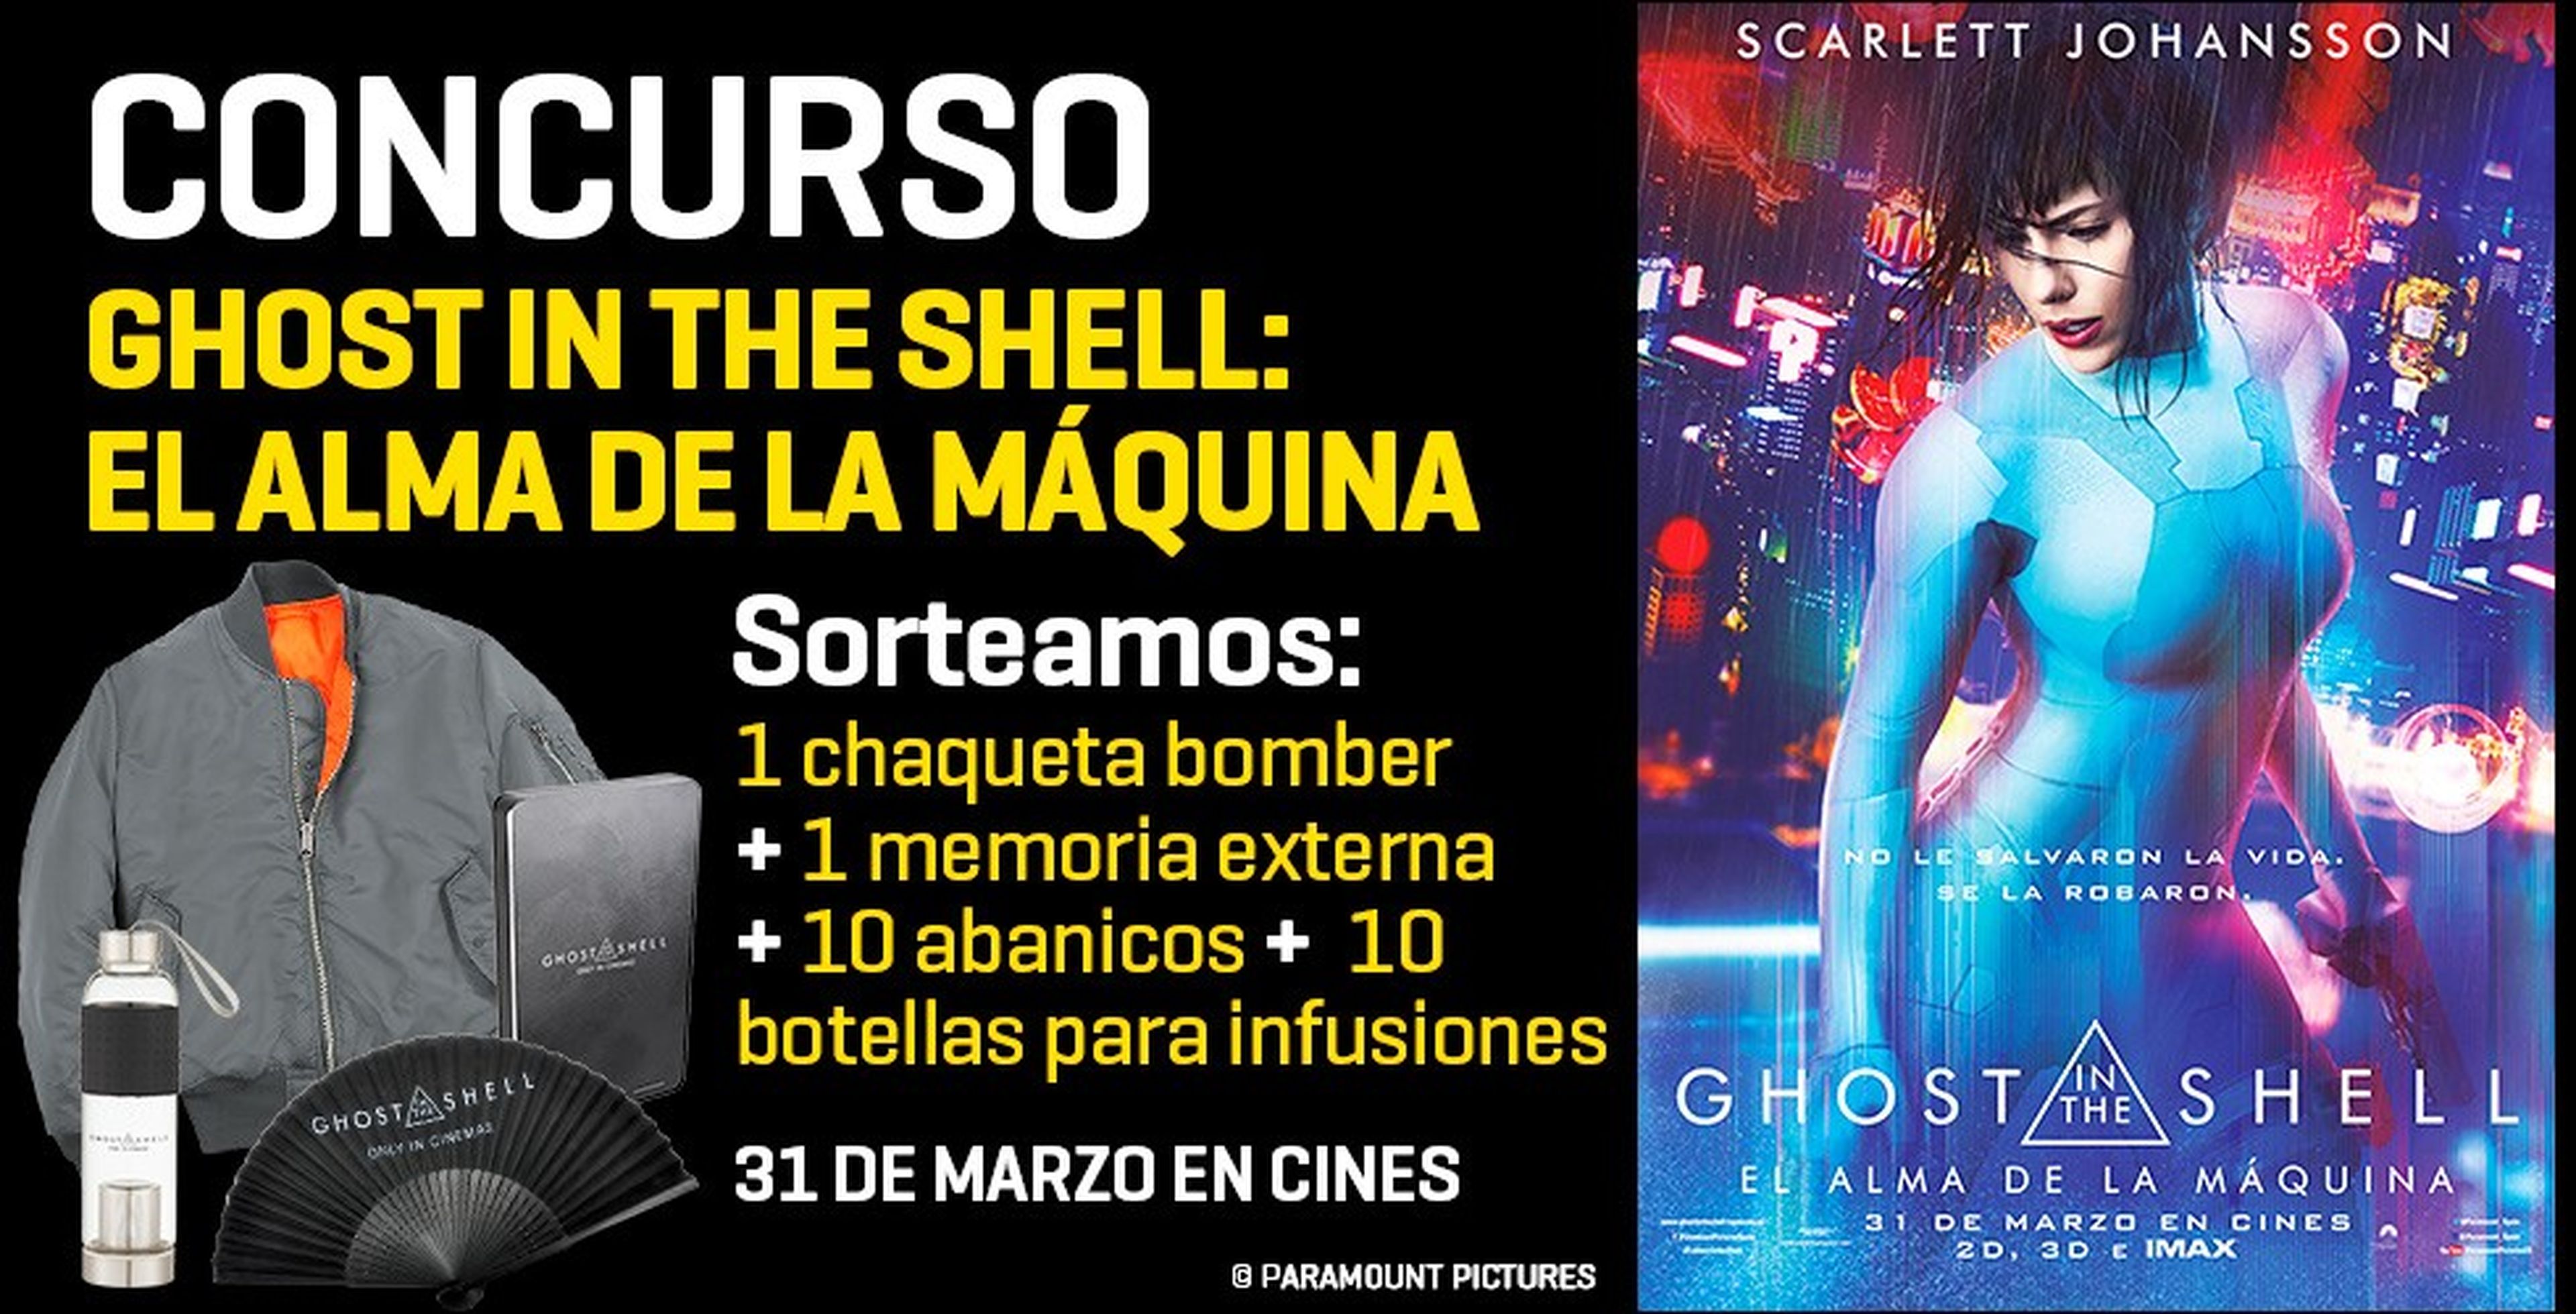 Concurso Ghost in the Shell